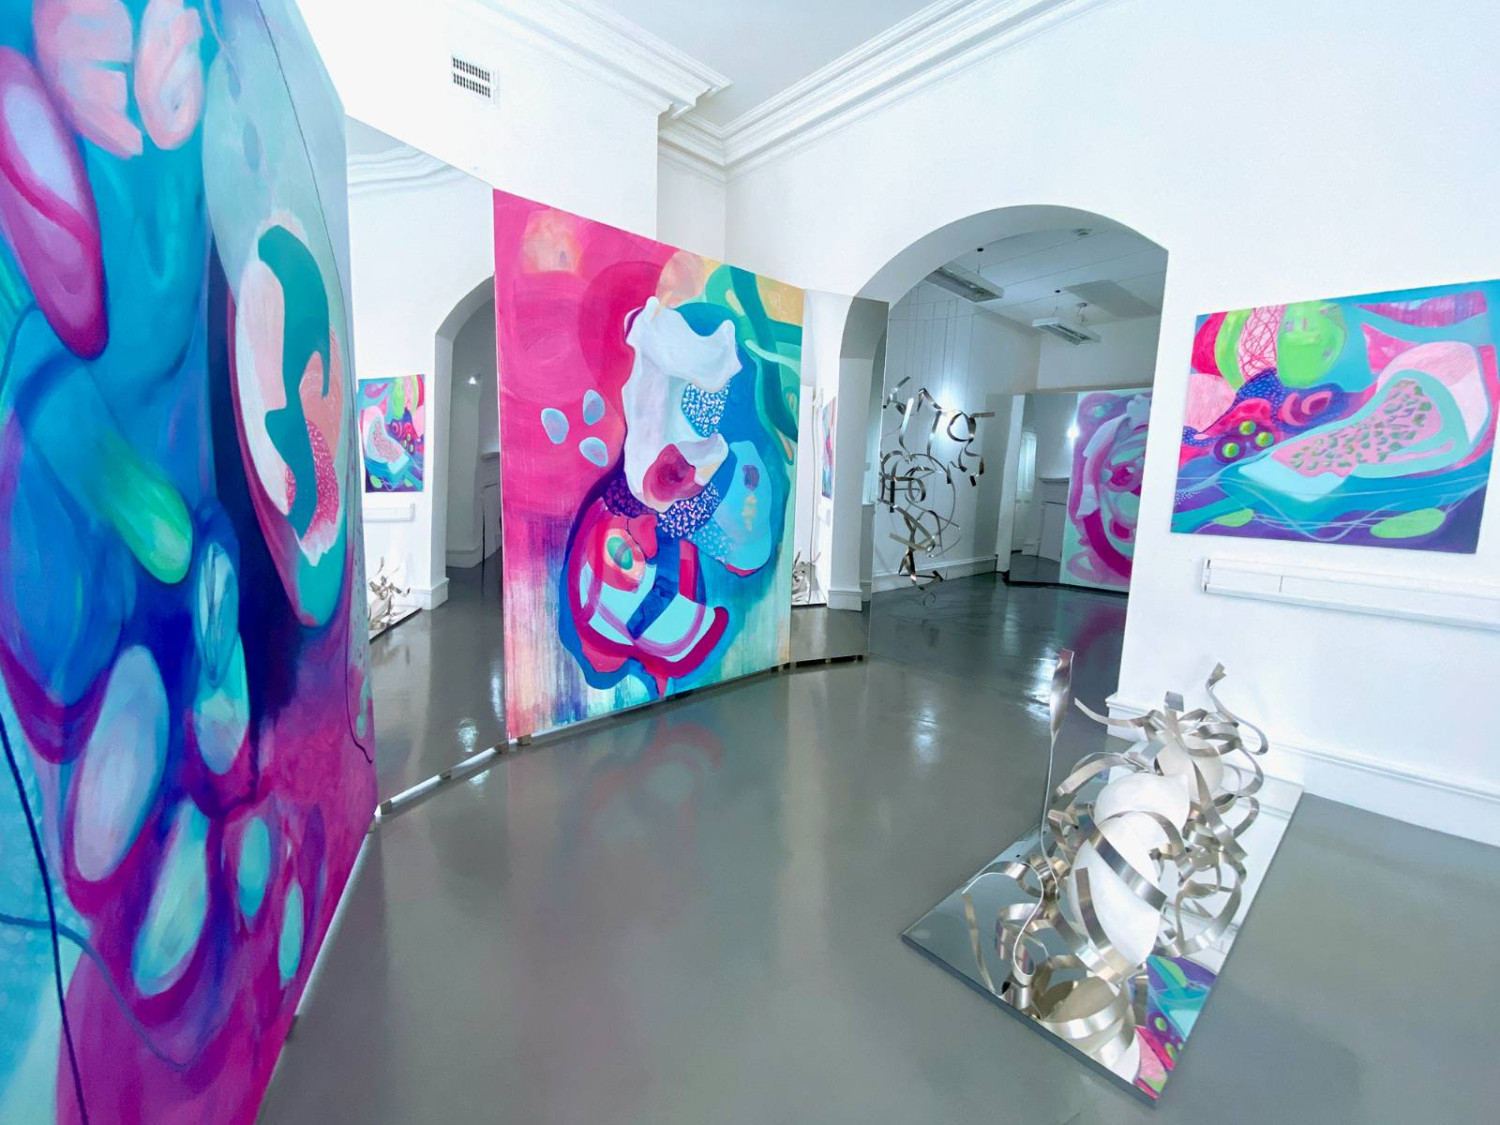 *Installation View 1*, oil paintings on linen, porcelain, aluminium sculptures and mirrors